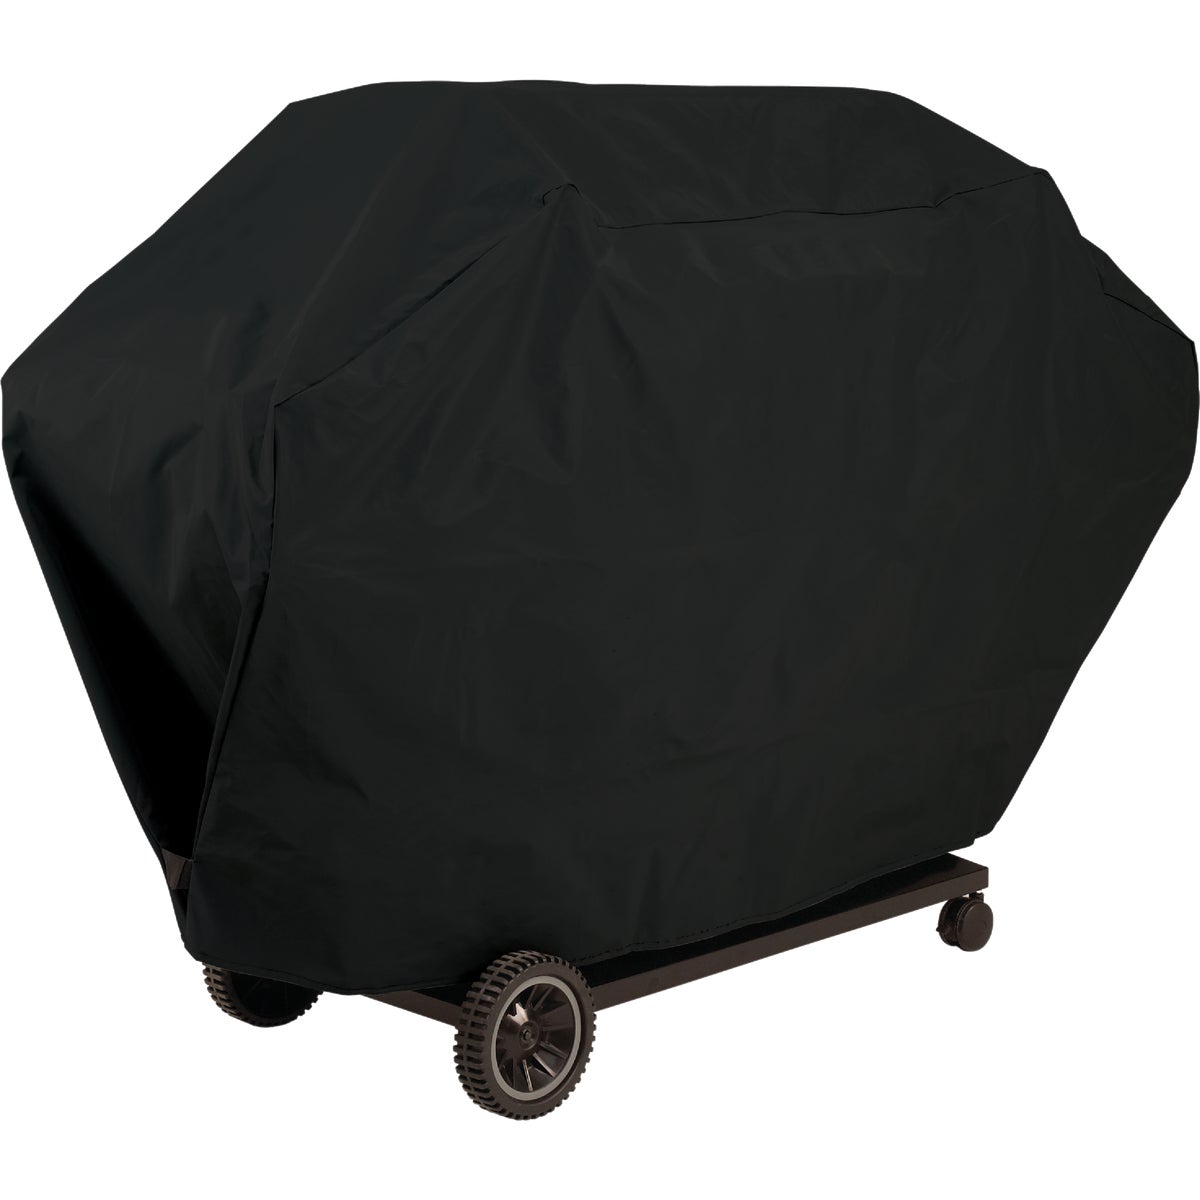 GrillPro 51 In. Black PVC Deluxe Grill Cover